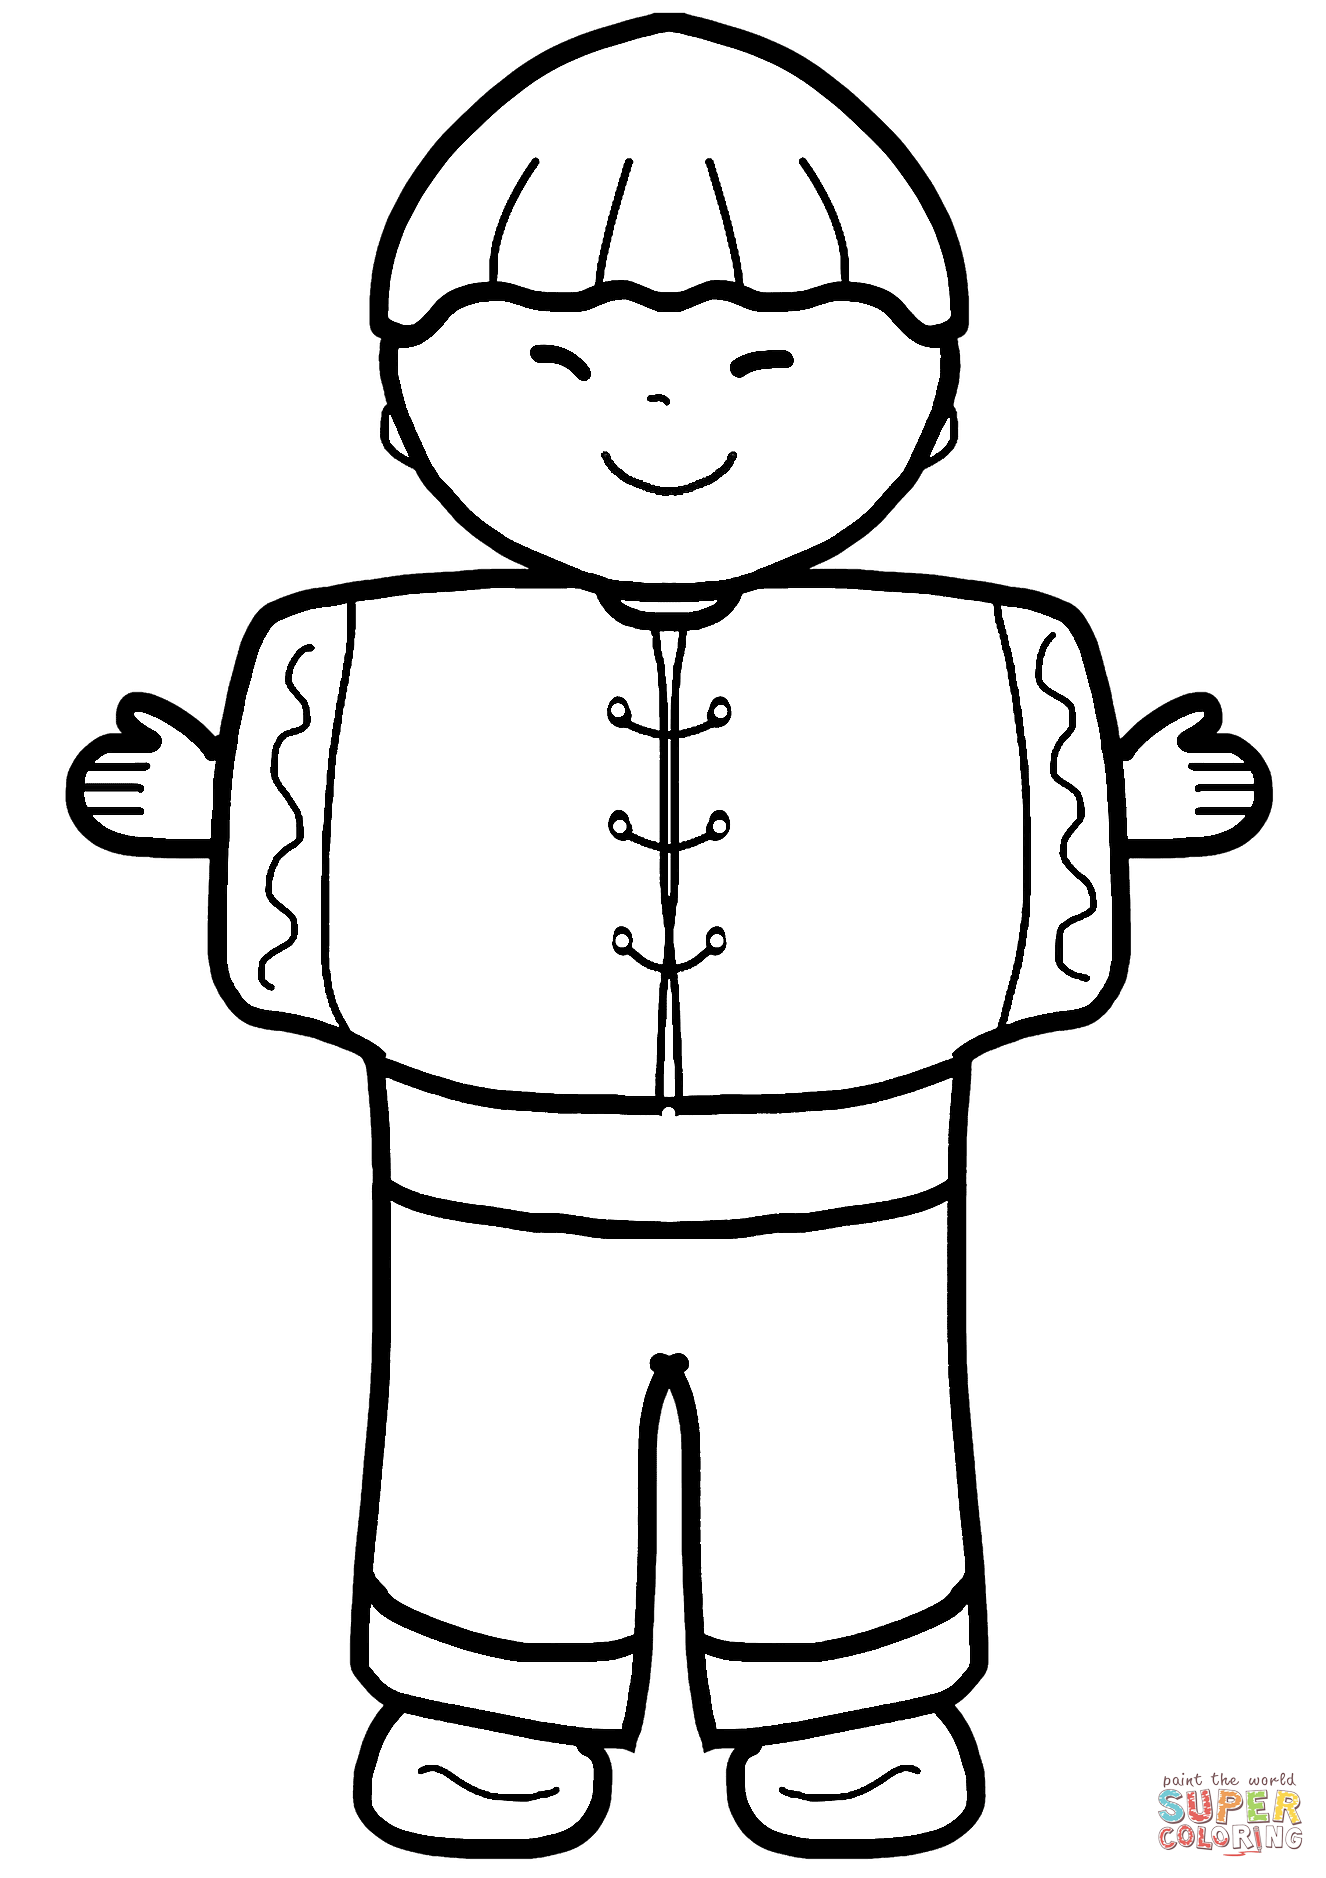 Chinese boy coloring page free printable coloring pages